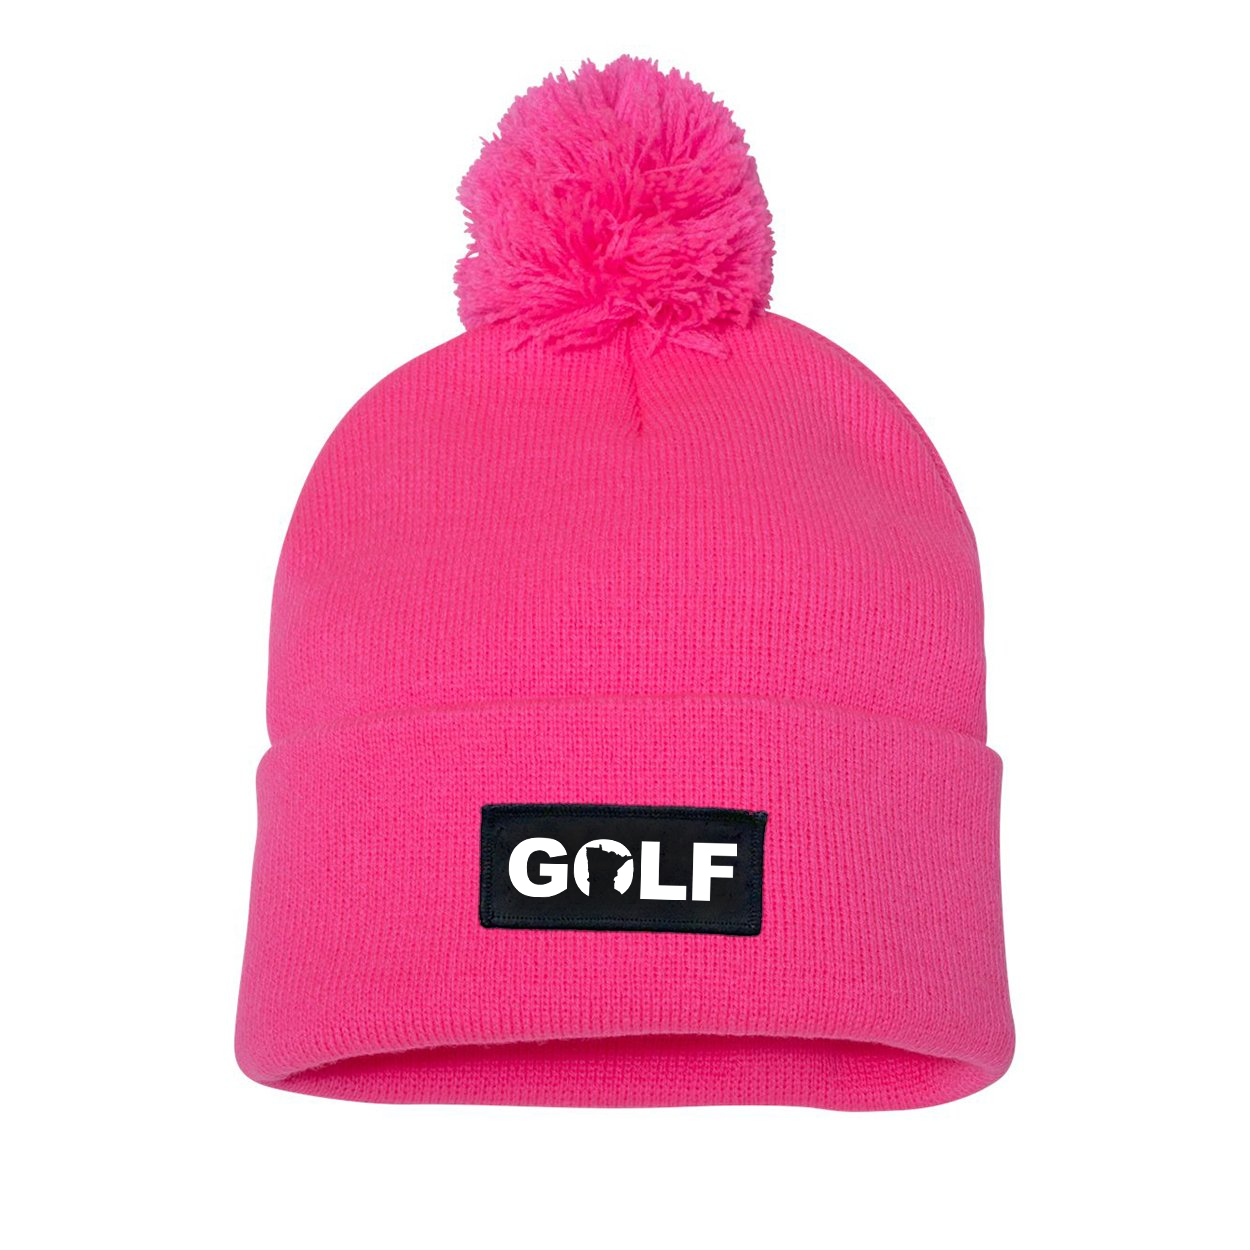 Golf Minnesota Night Out Woven Patch Roll Up Pom Knit Beanie Pink (White Logo)